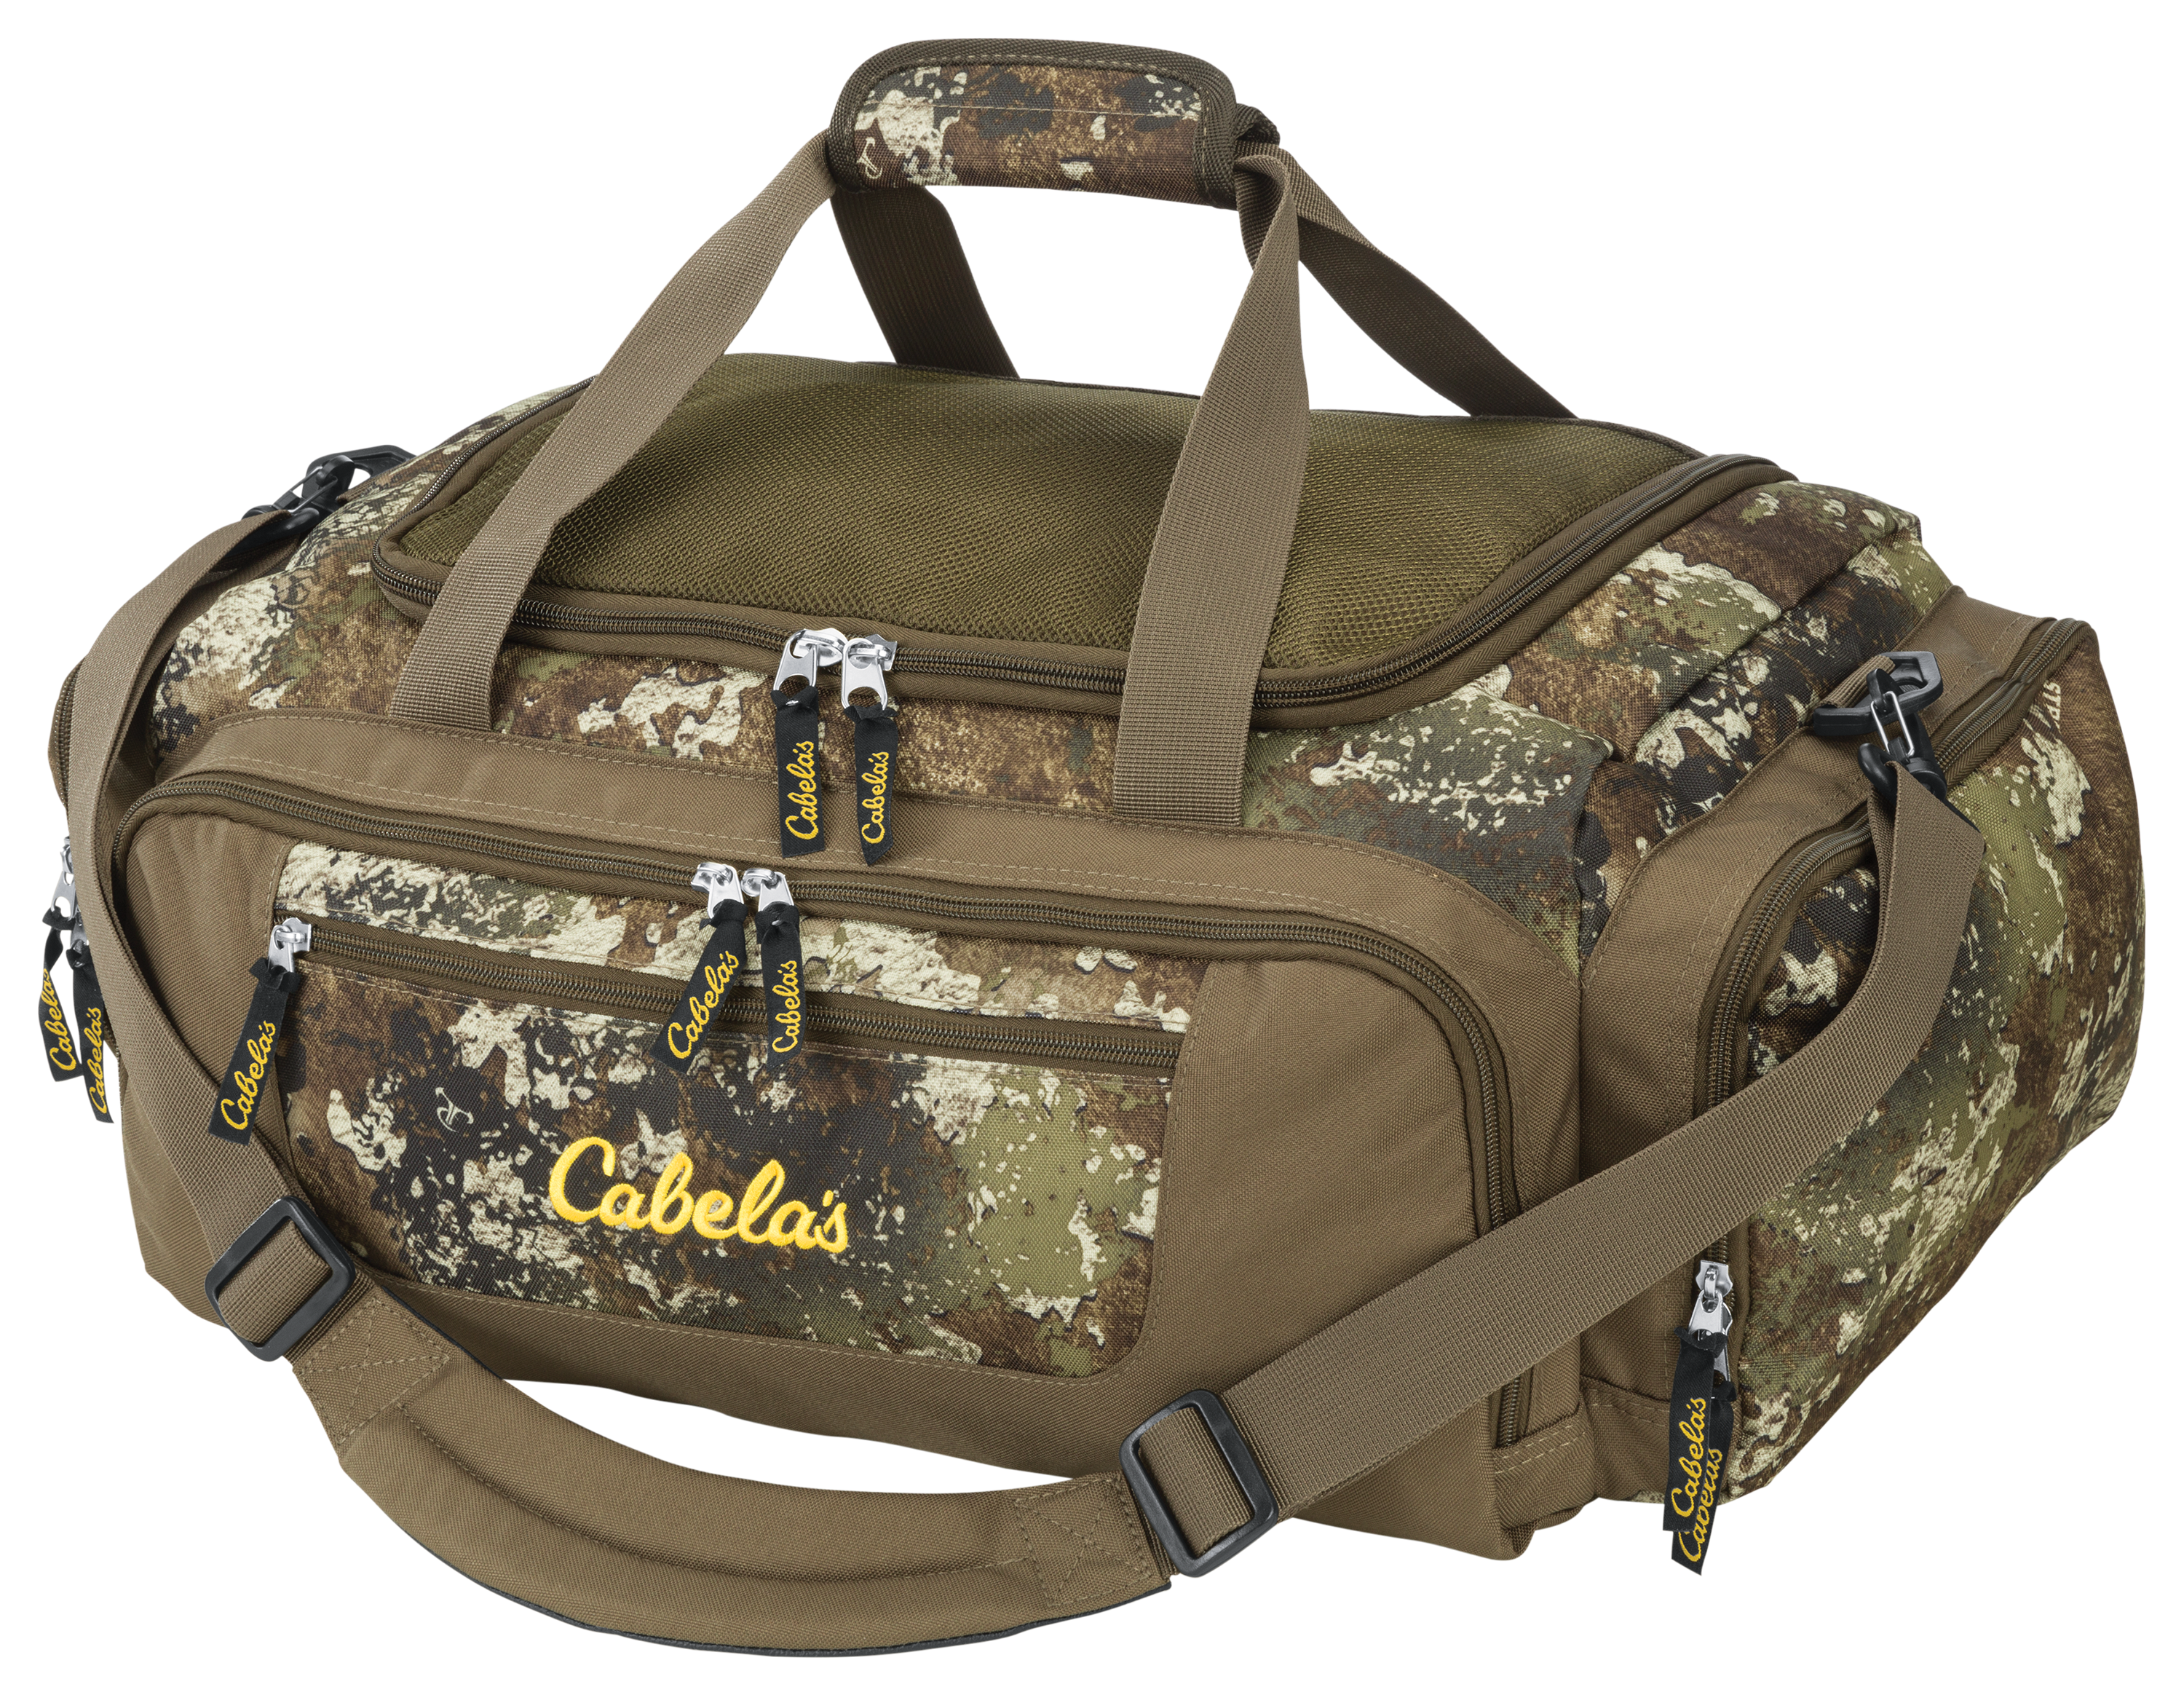 Cabela's Catch All Small Duffle Bag Gear Bag Hunting Fishing